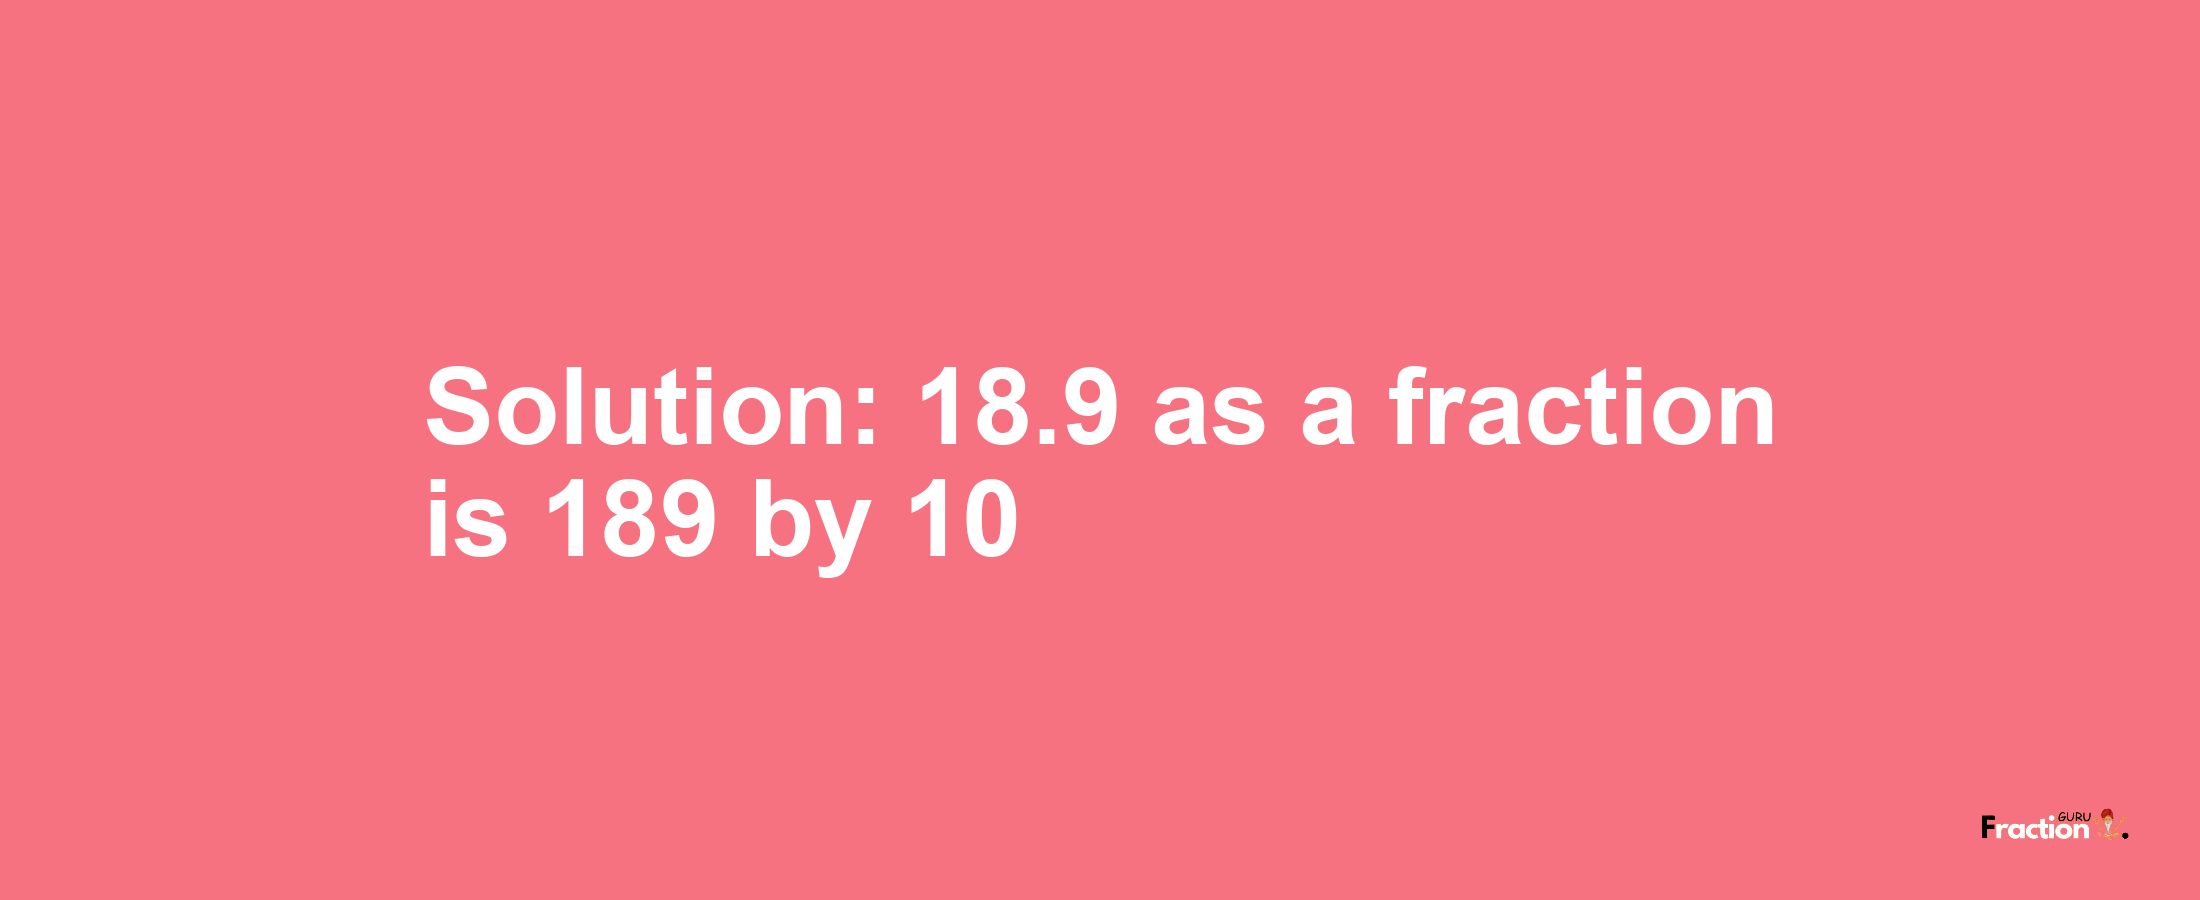 Solution:18.9 as a fraction is 189/10